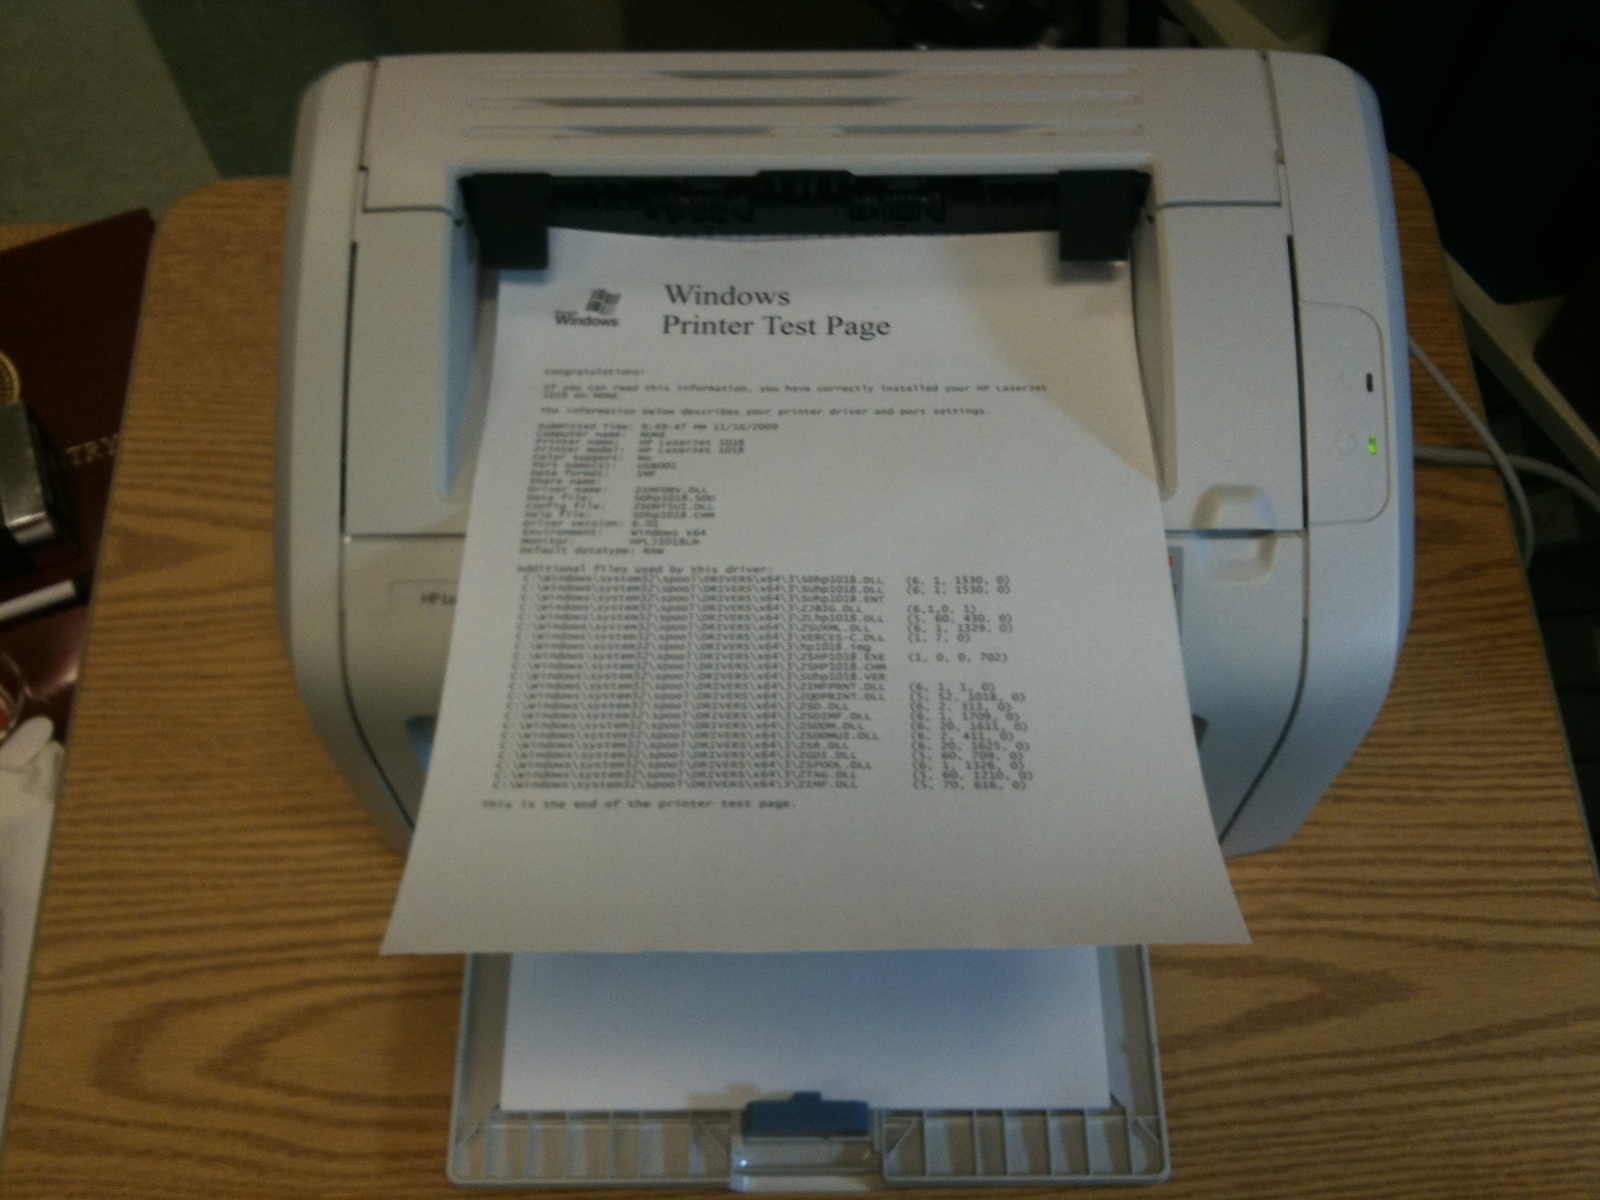 Collage Factory: Used HP LaserJet 1018 excellent condition for selling